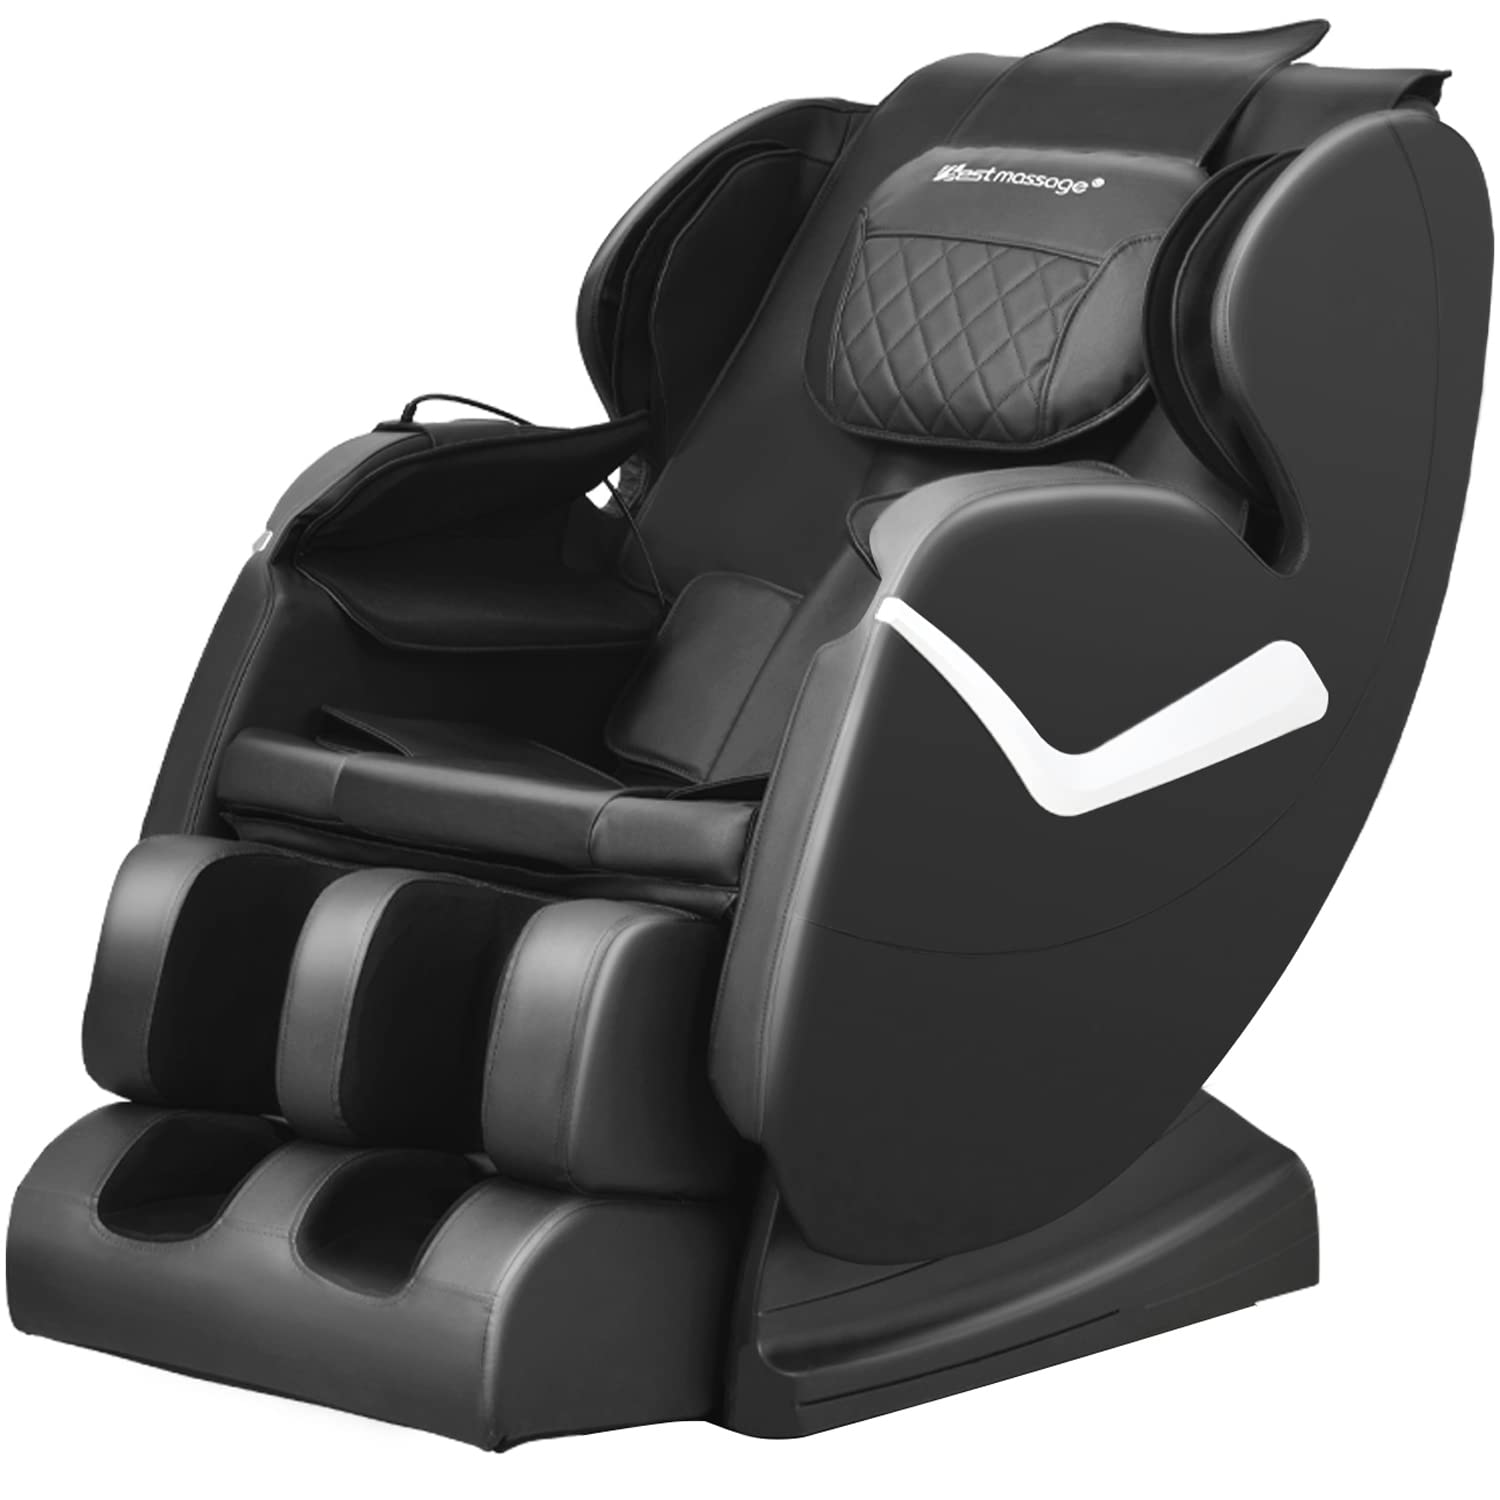 Massage Chair Zero Gravity Full Body Electric Shiatsu Massage Chair Recliner with Foot Rollers Built-in Heat Therapy Air Massage System Stretch Vibrating for Home Office(Black)